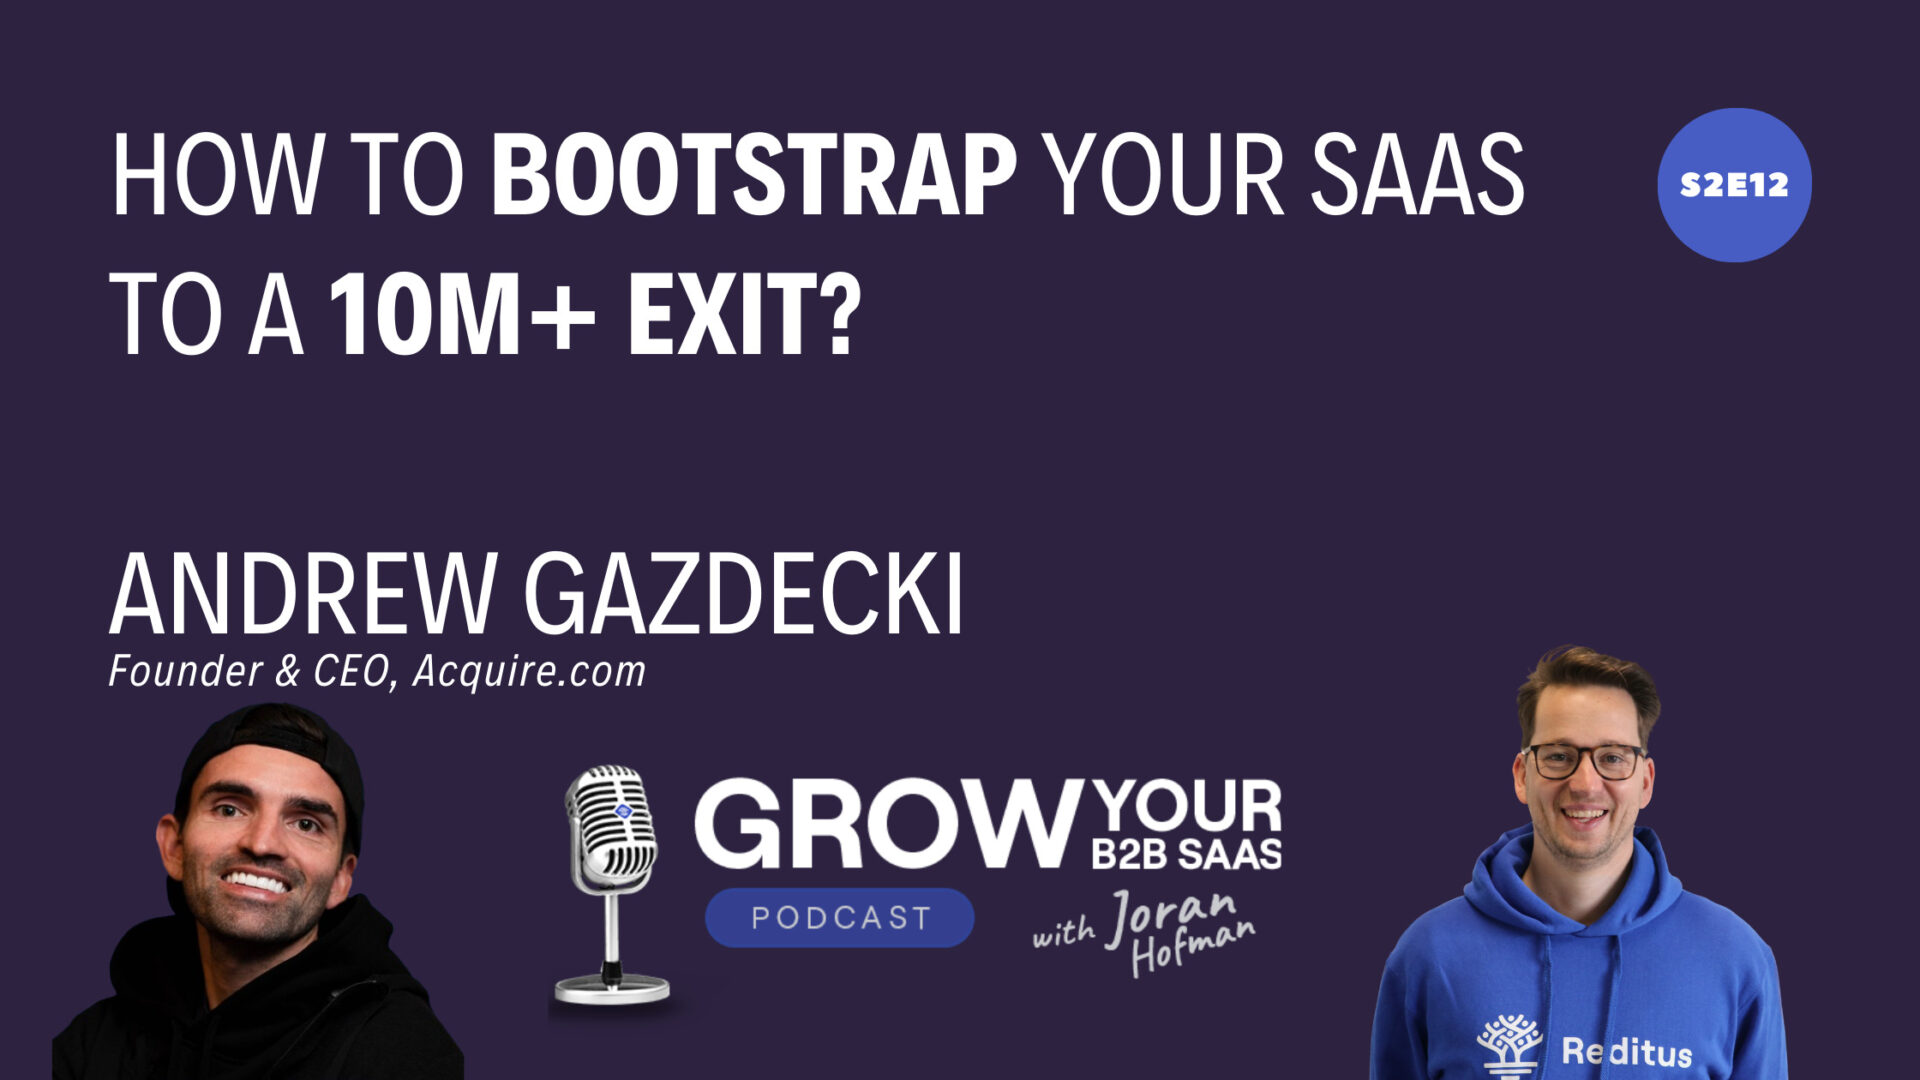 https://www.getreditus.com/podcast/s2e12-how-to-bootstrap-your-saas-to-a-10m-exit-with-andrew-gazdecki/